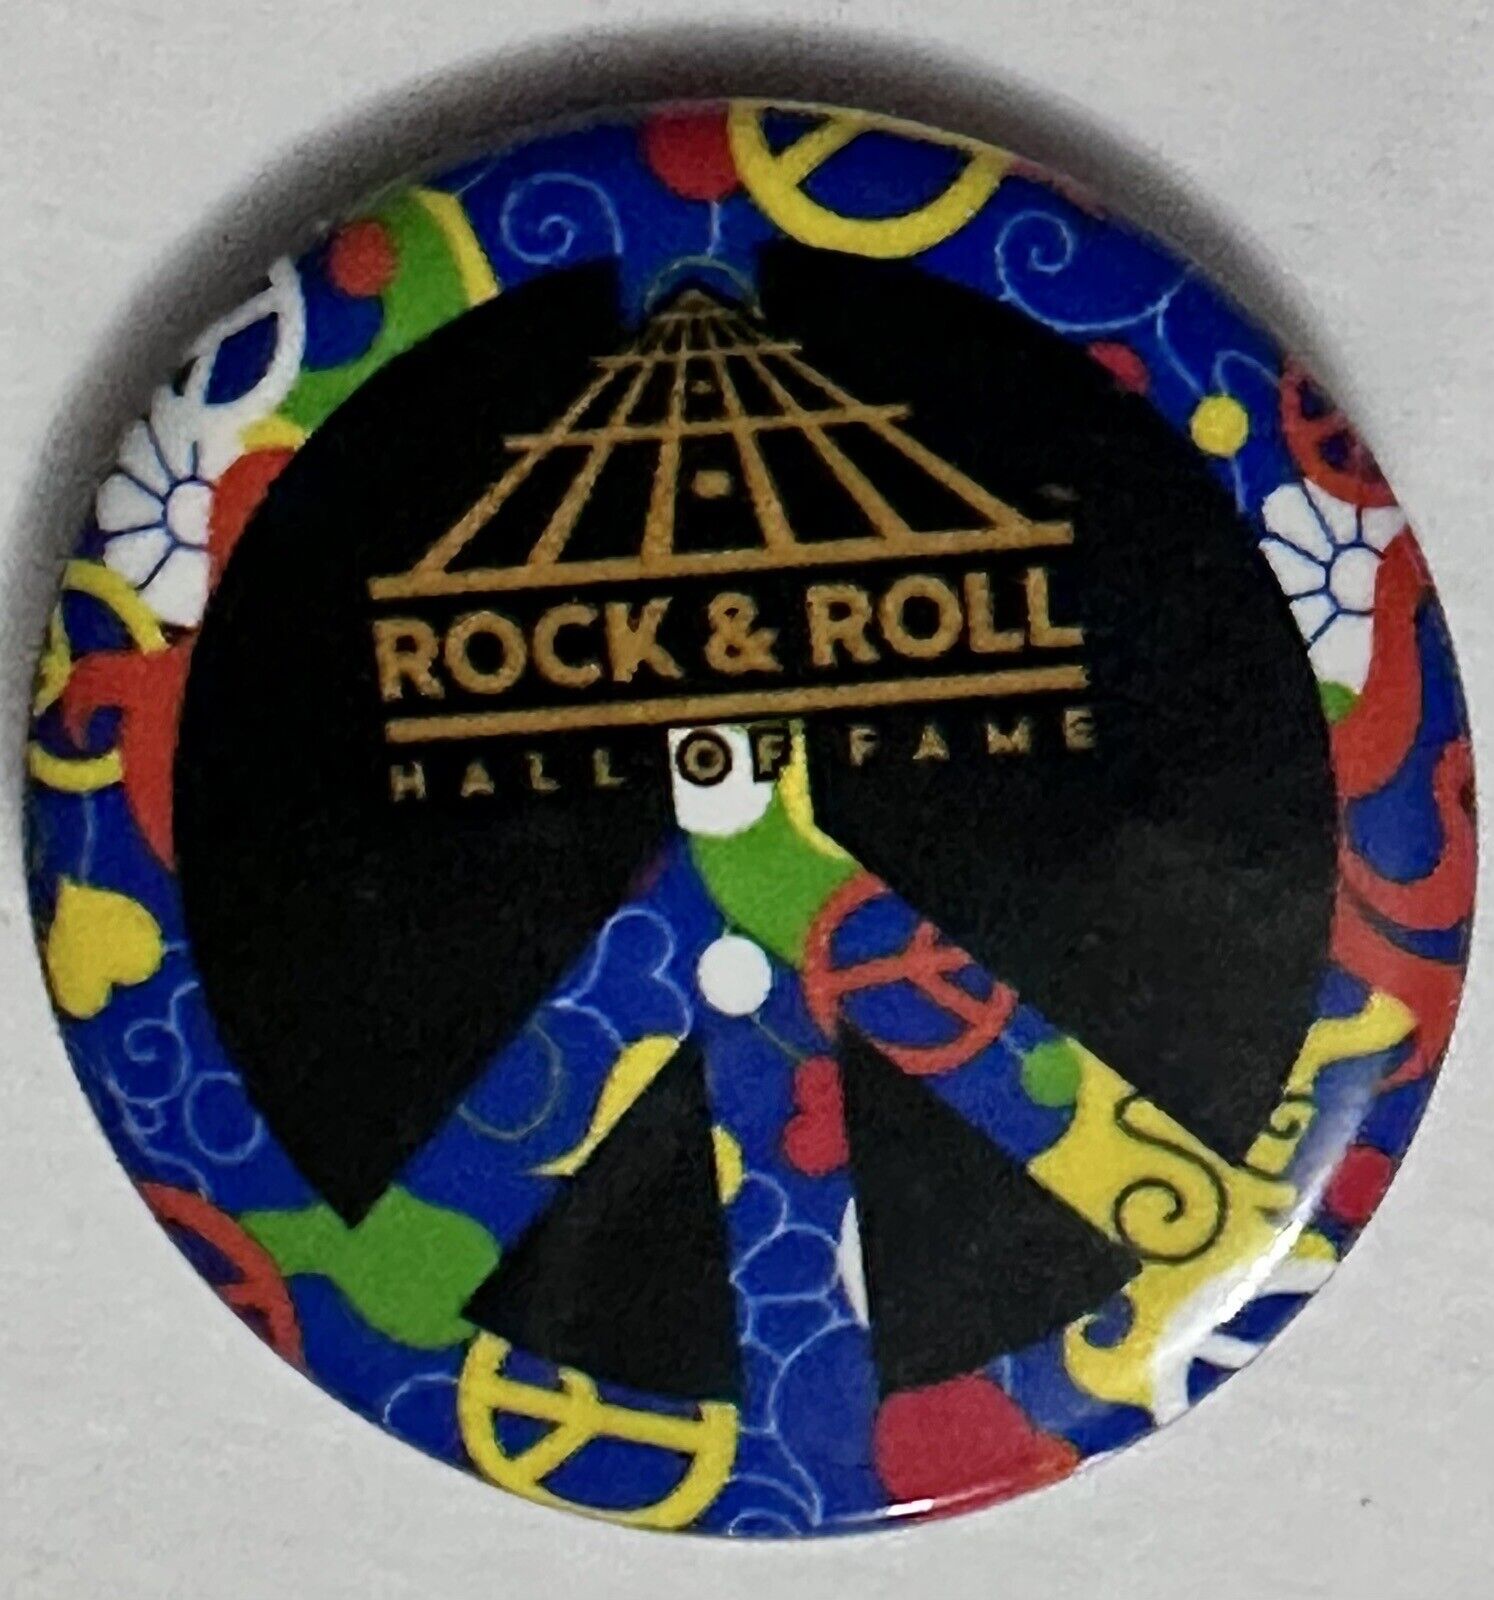 Rock & Roll Hall of Fame Cleveland, Ohio 1” Pinback Button